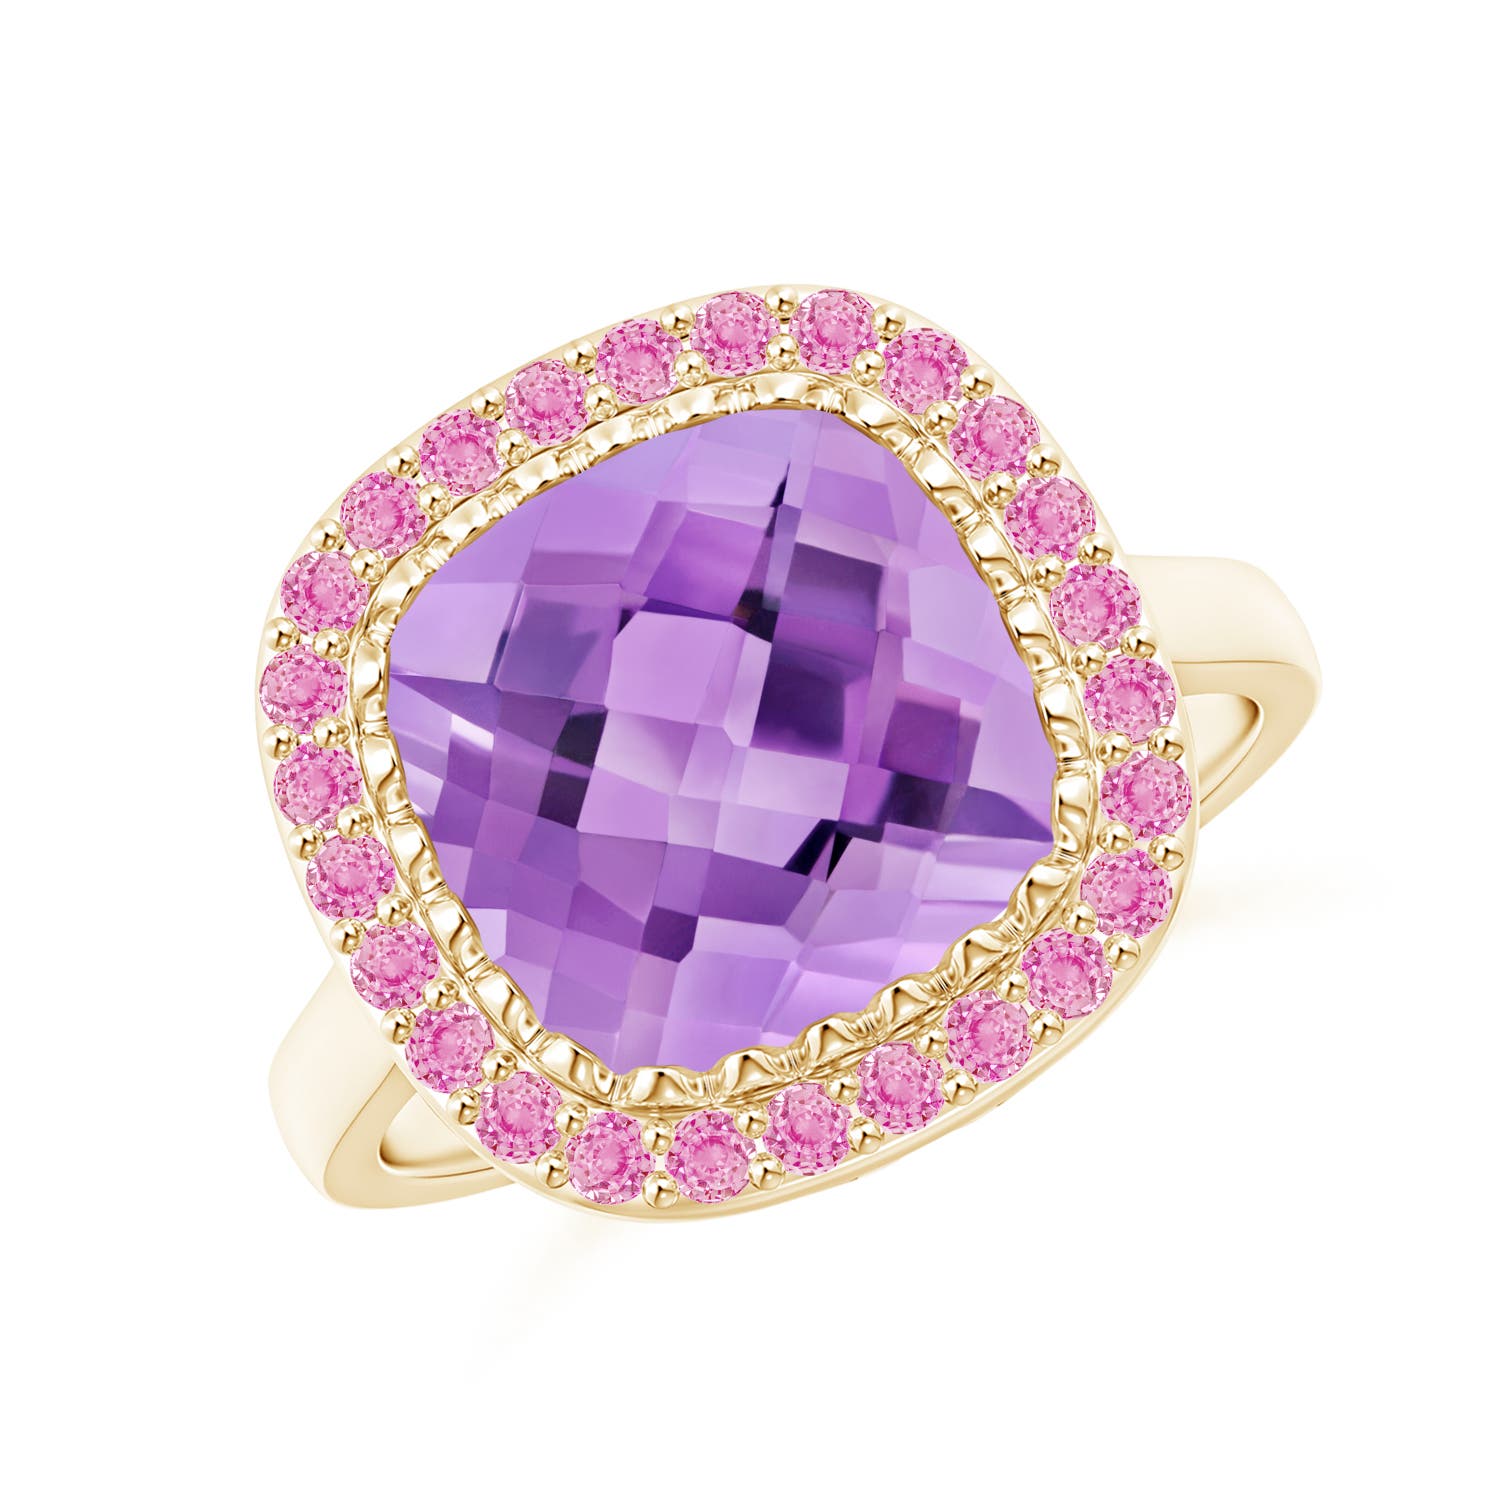 A - Amethyst / 4.65 CT / 14 KT Yellow Gold